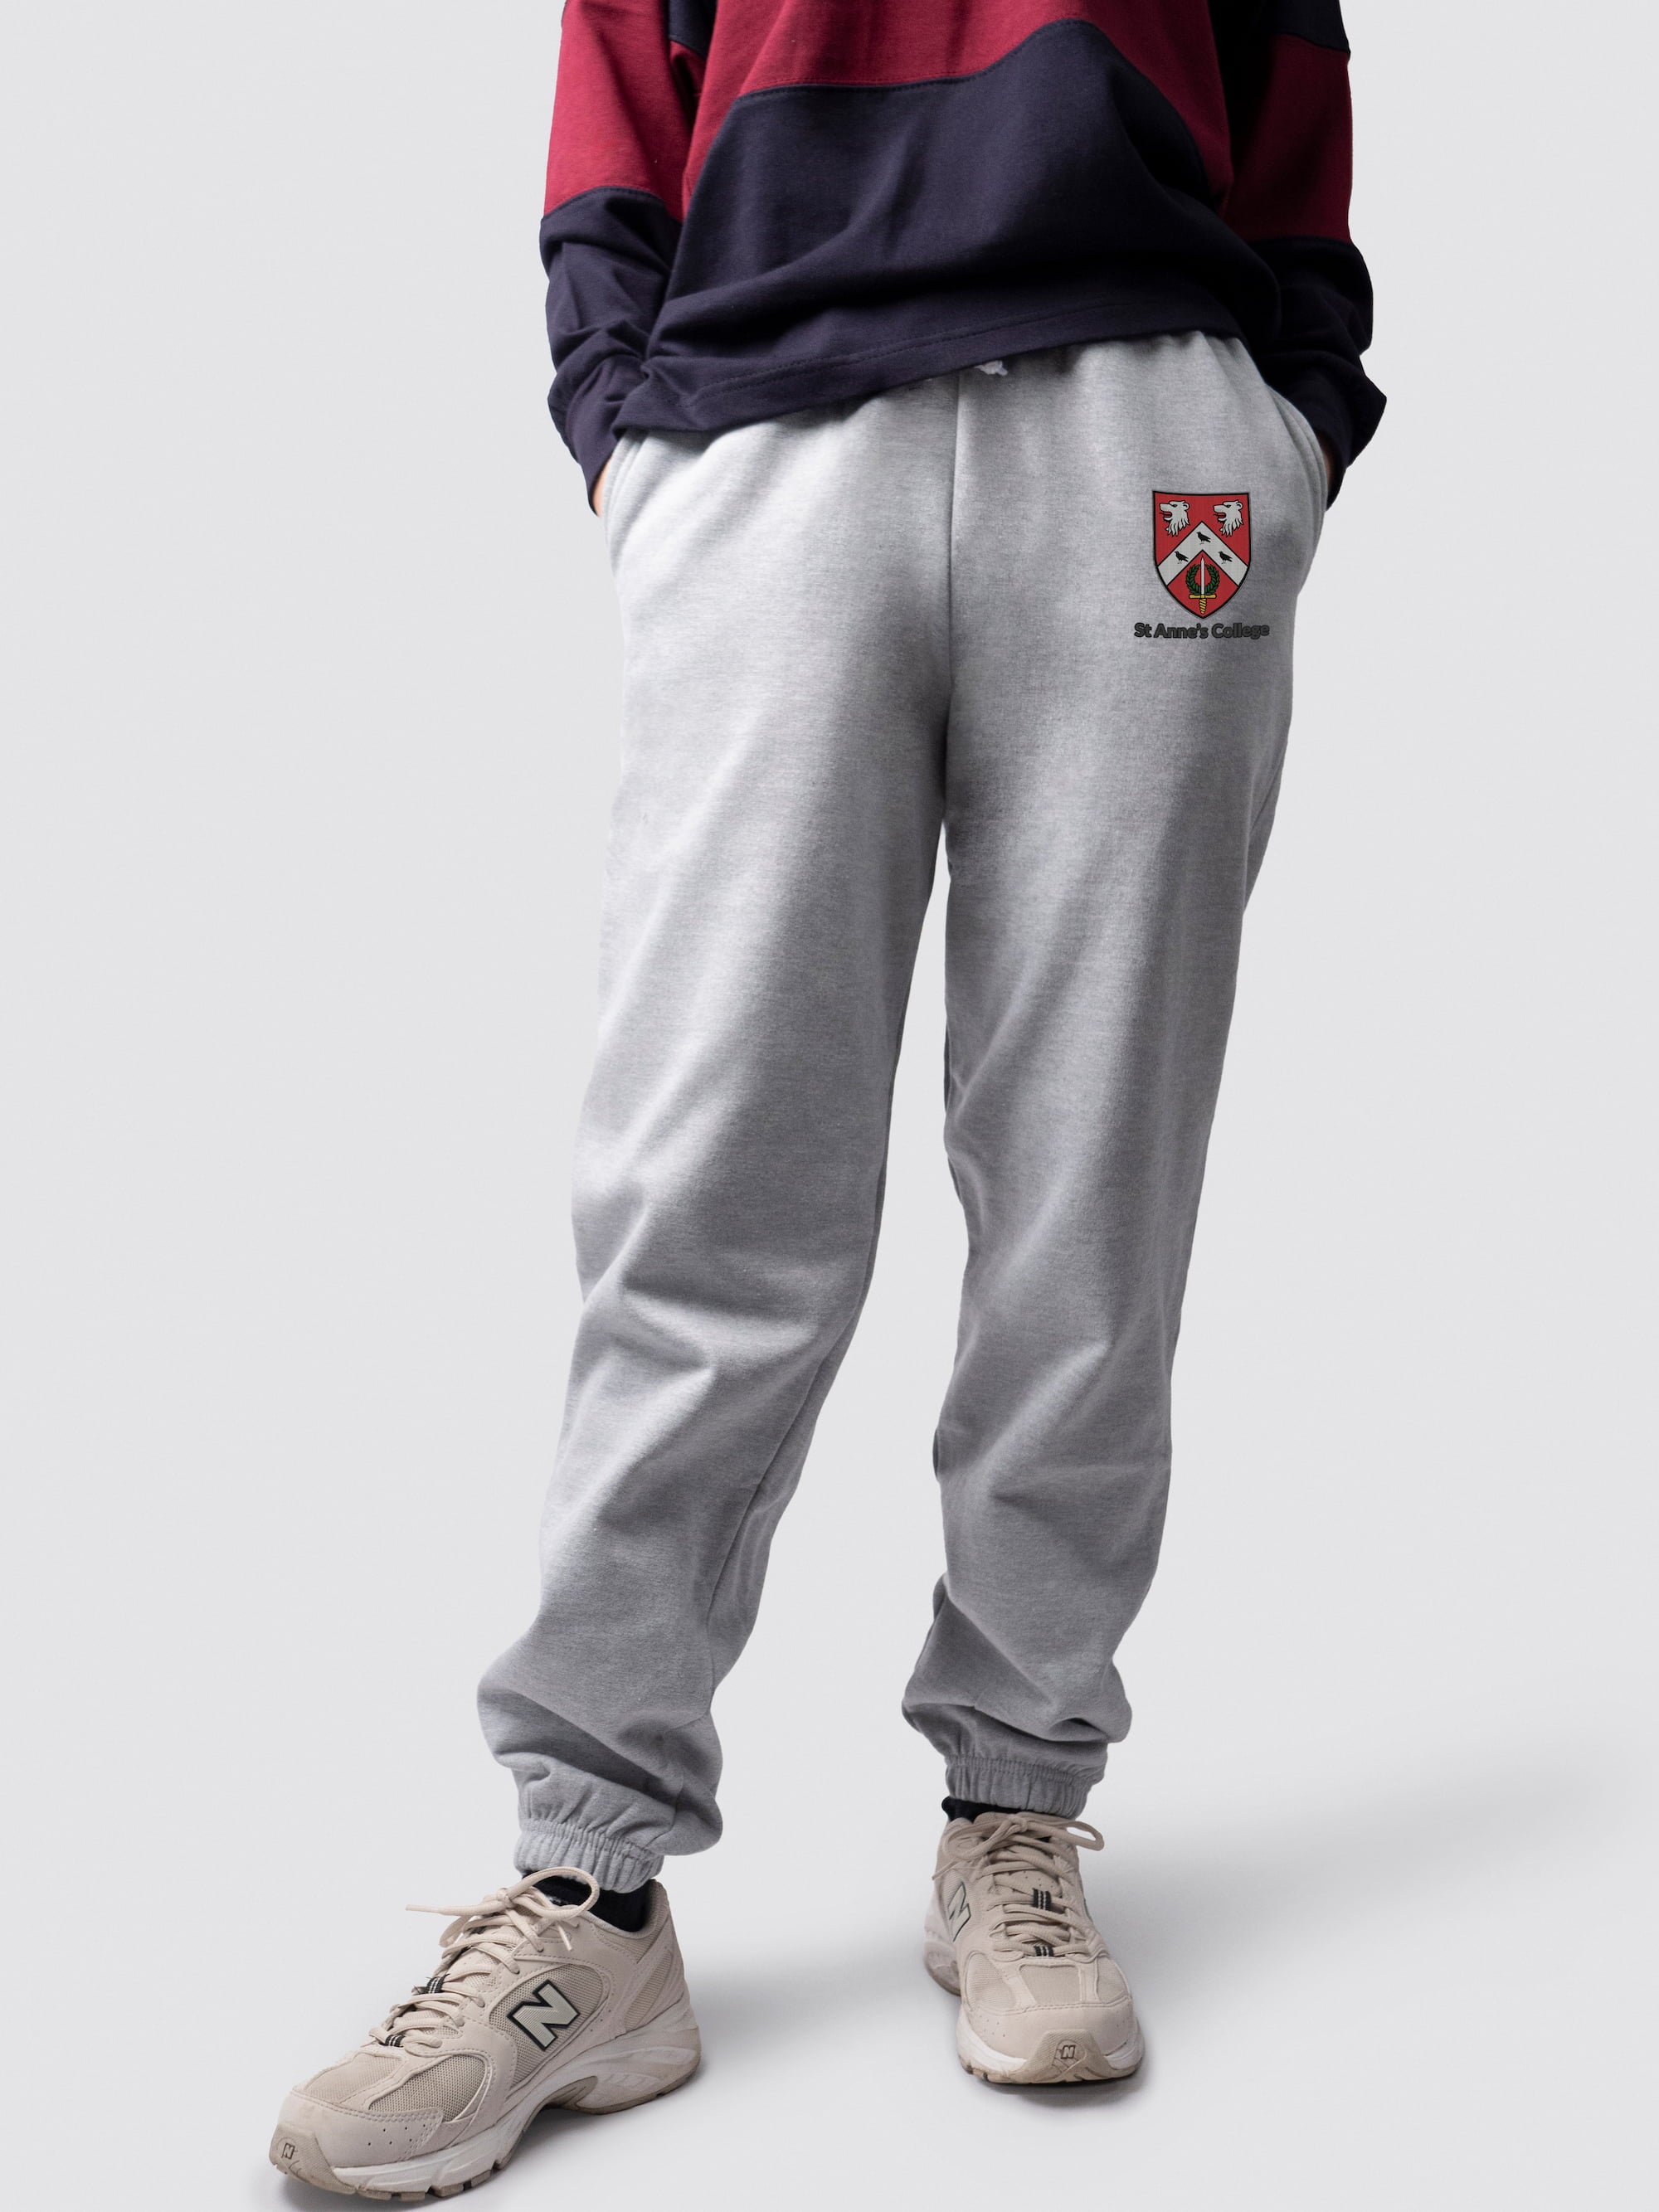 undergraduate cuffed sweatpants, made from soft cotton fabric, with St Anne's logo